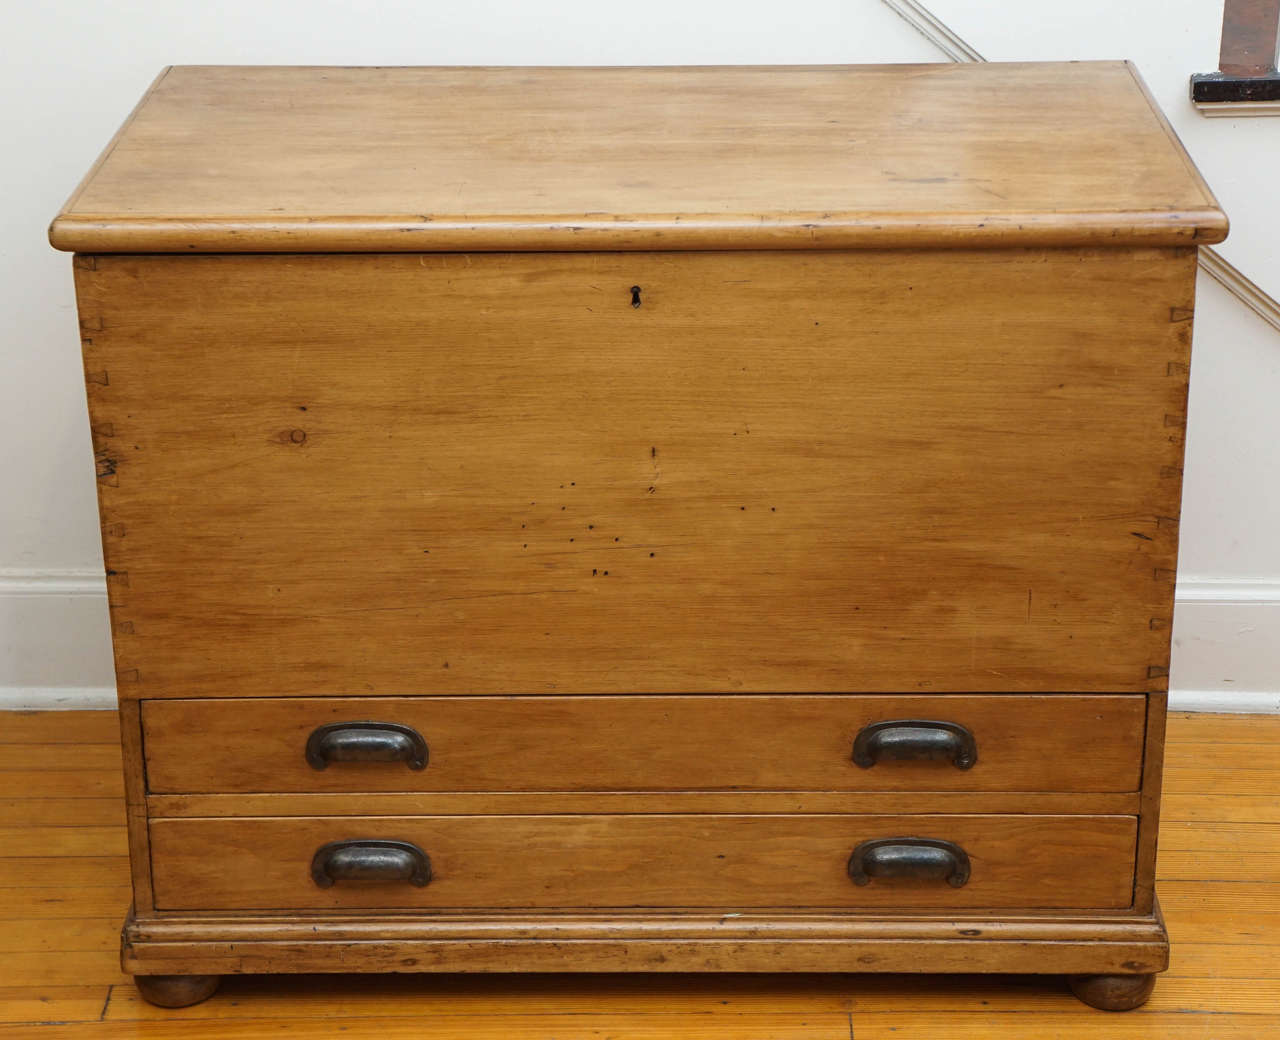 It is rare for us to find a mule chest. This is a wonderfully useful piece of furniture at a reasonable price. The top opens for deep storage and there are two drawers underneath for additional storage. Original hardware and a rich patina are the